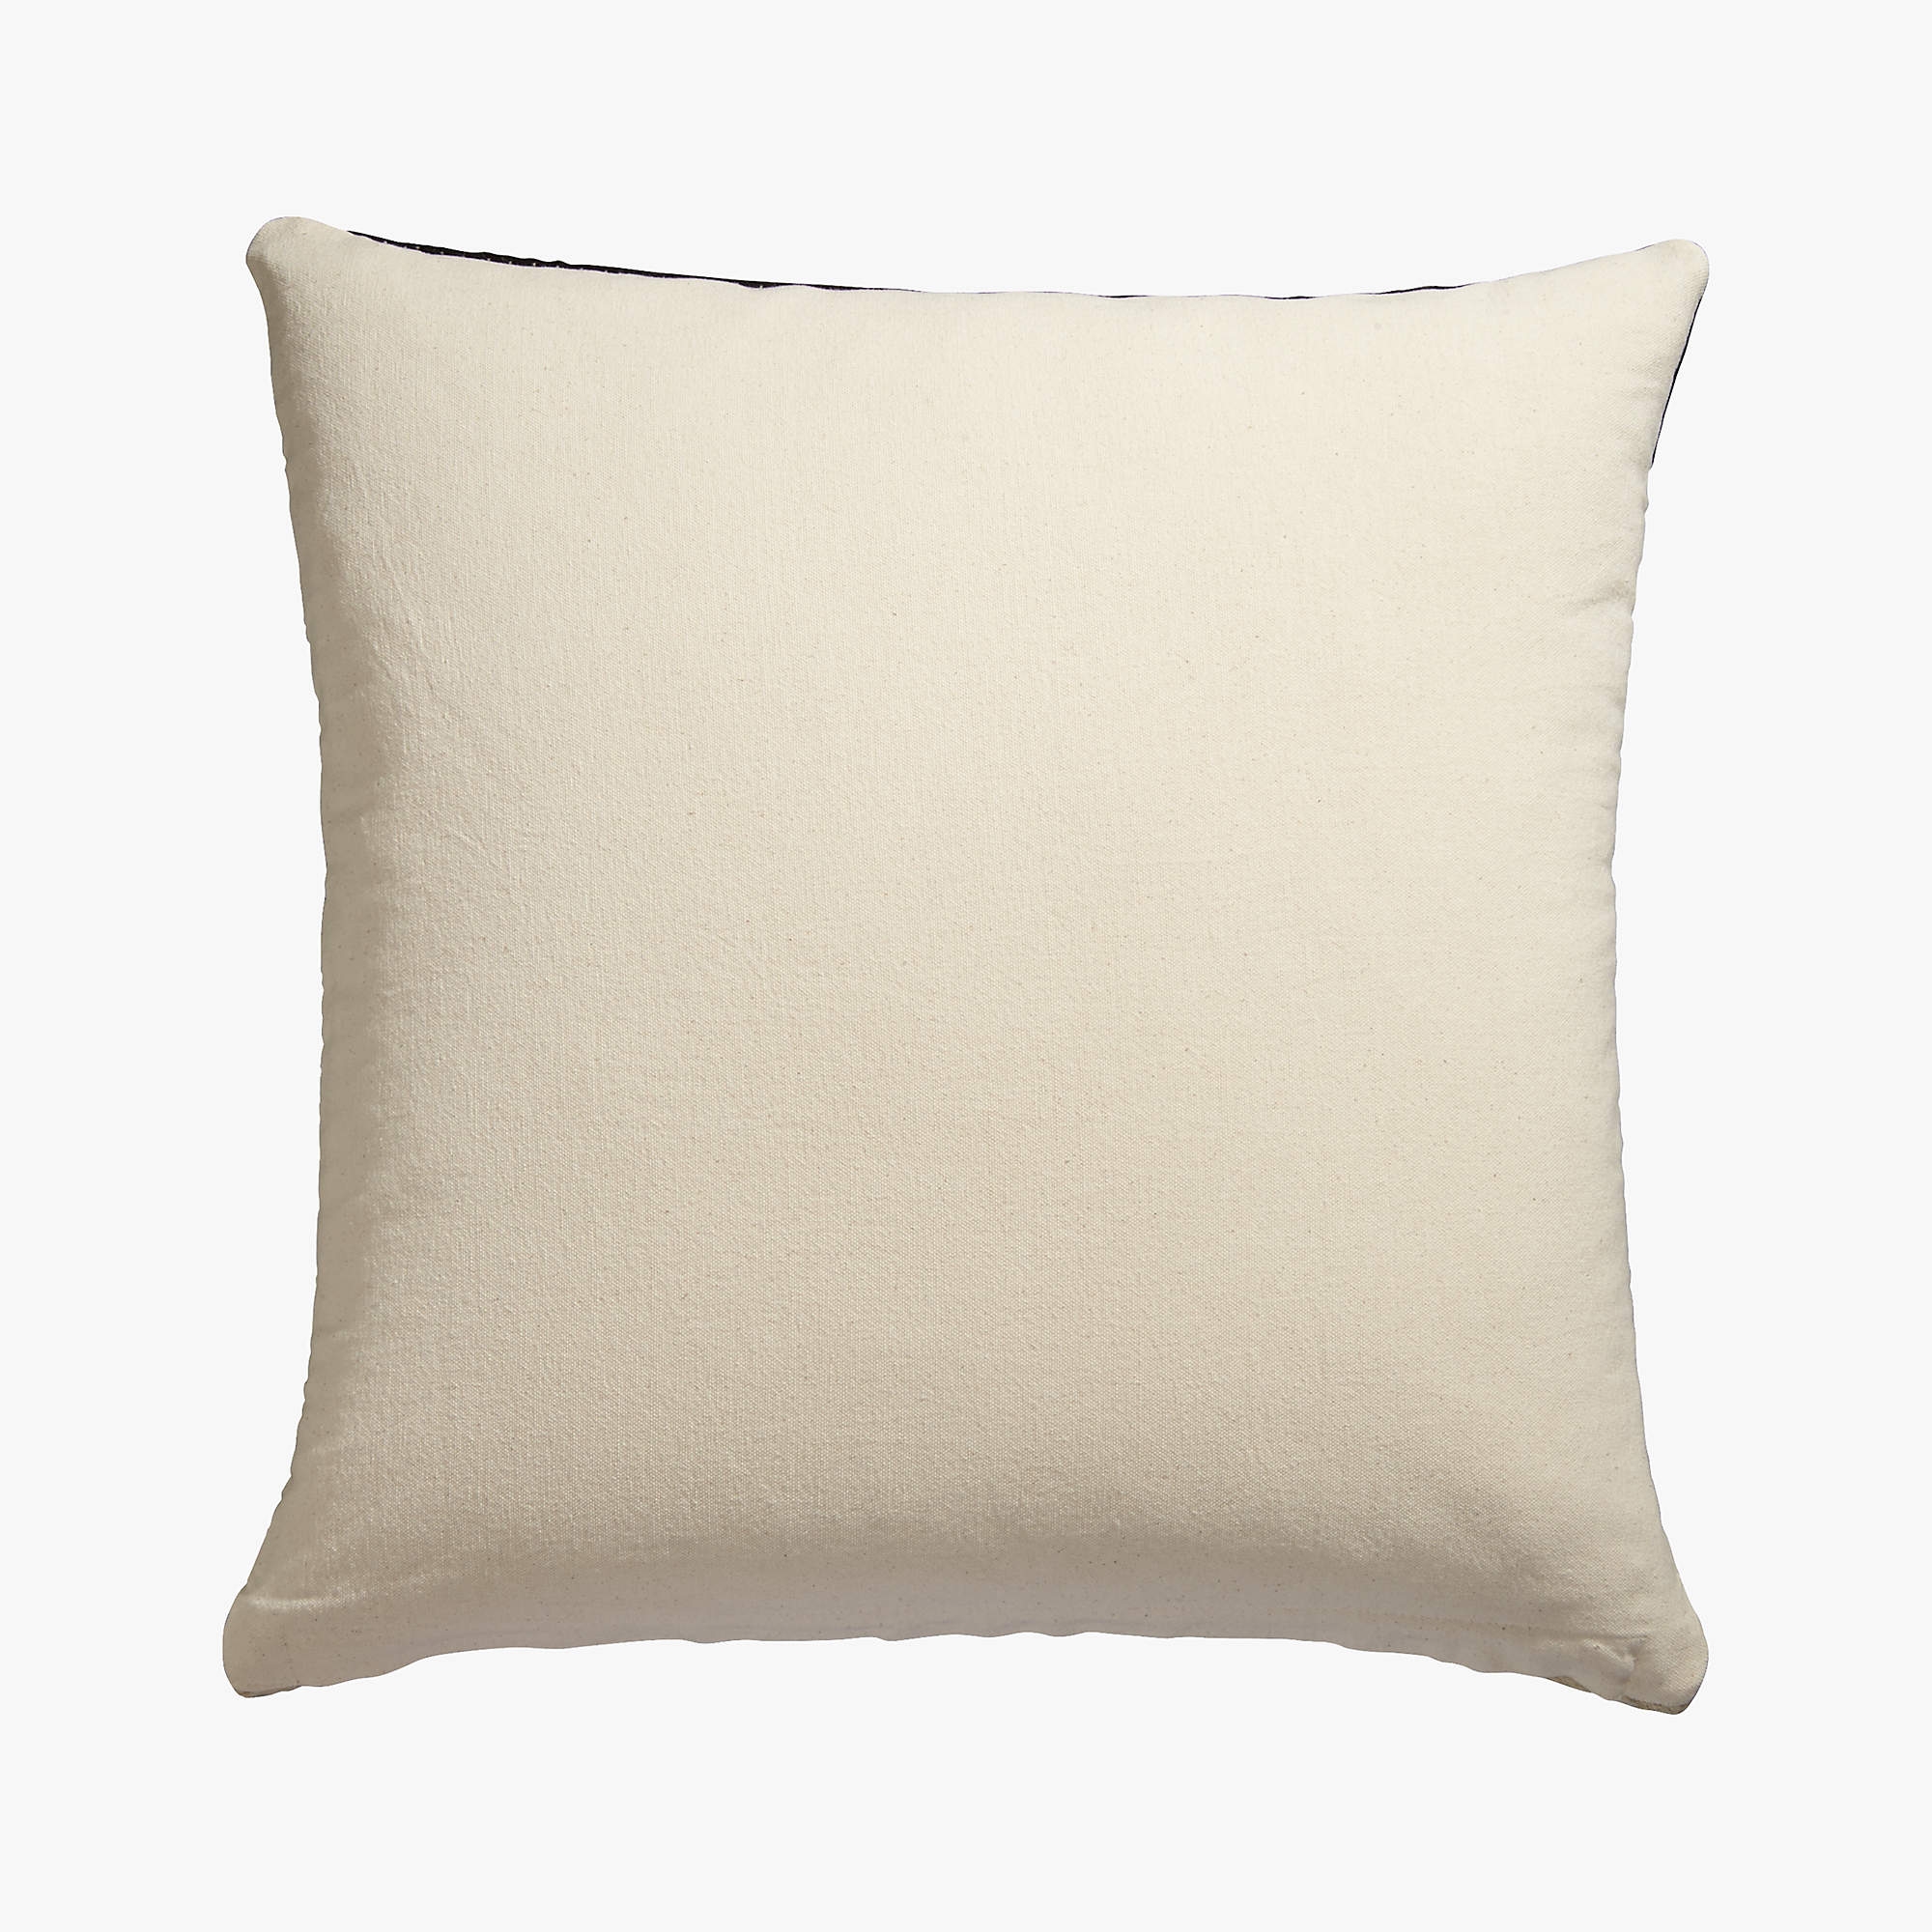 Reflect Pillow with Down-Alternative Insert, 20" x 20" - Image 2